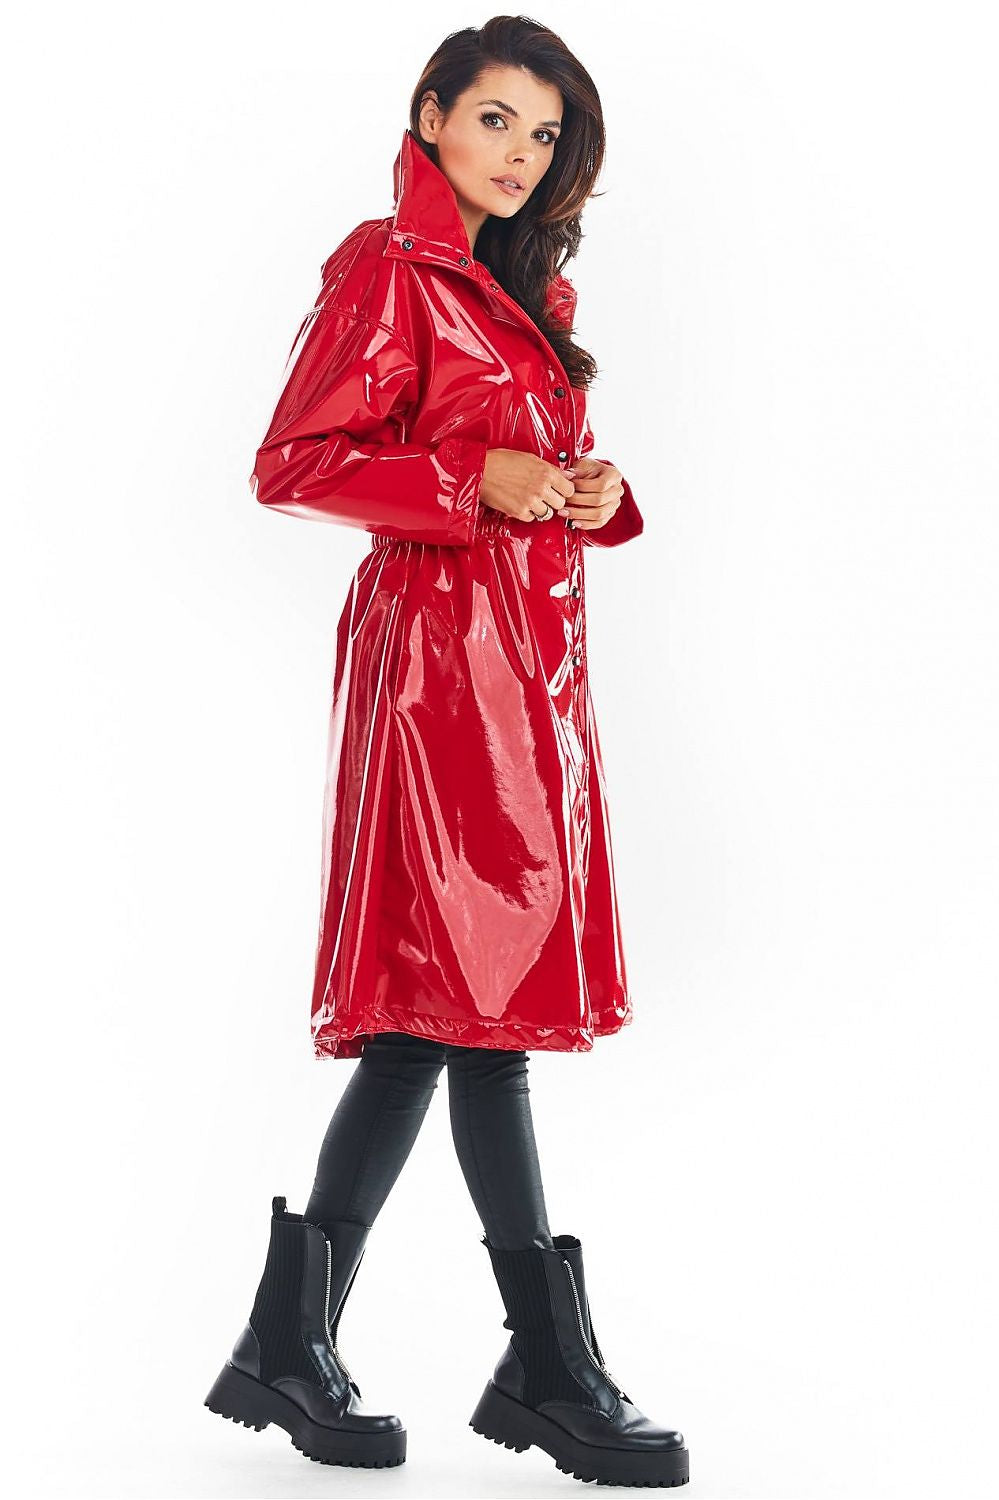 Awama Red High Collar Vinyl Coat The Groovalution